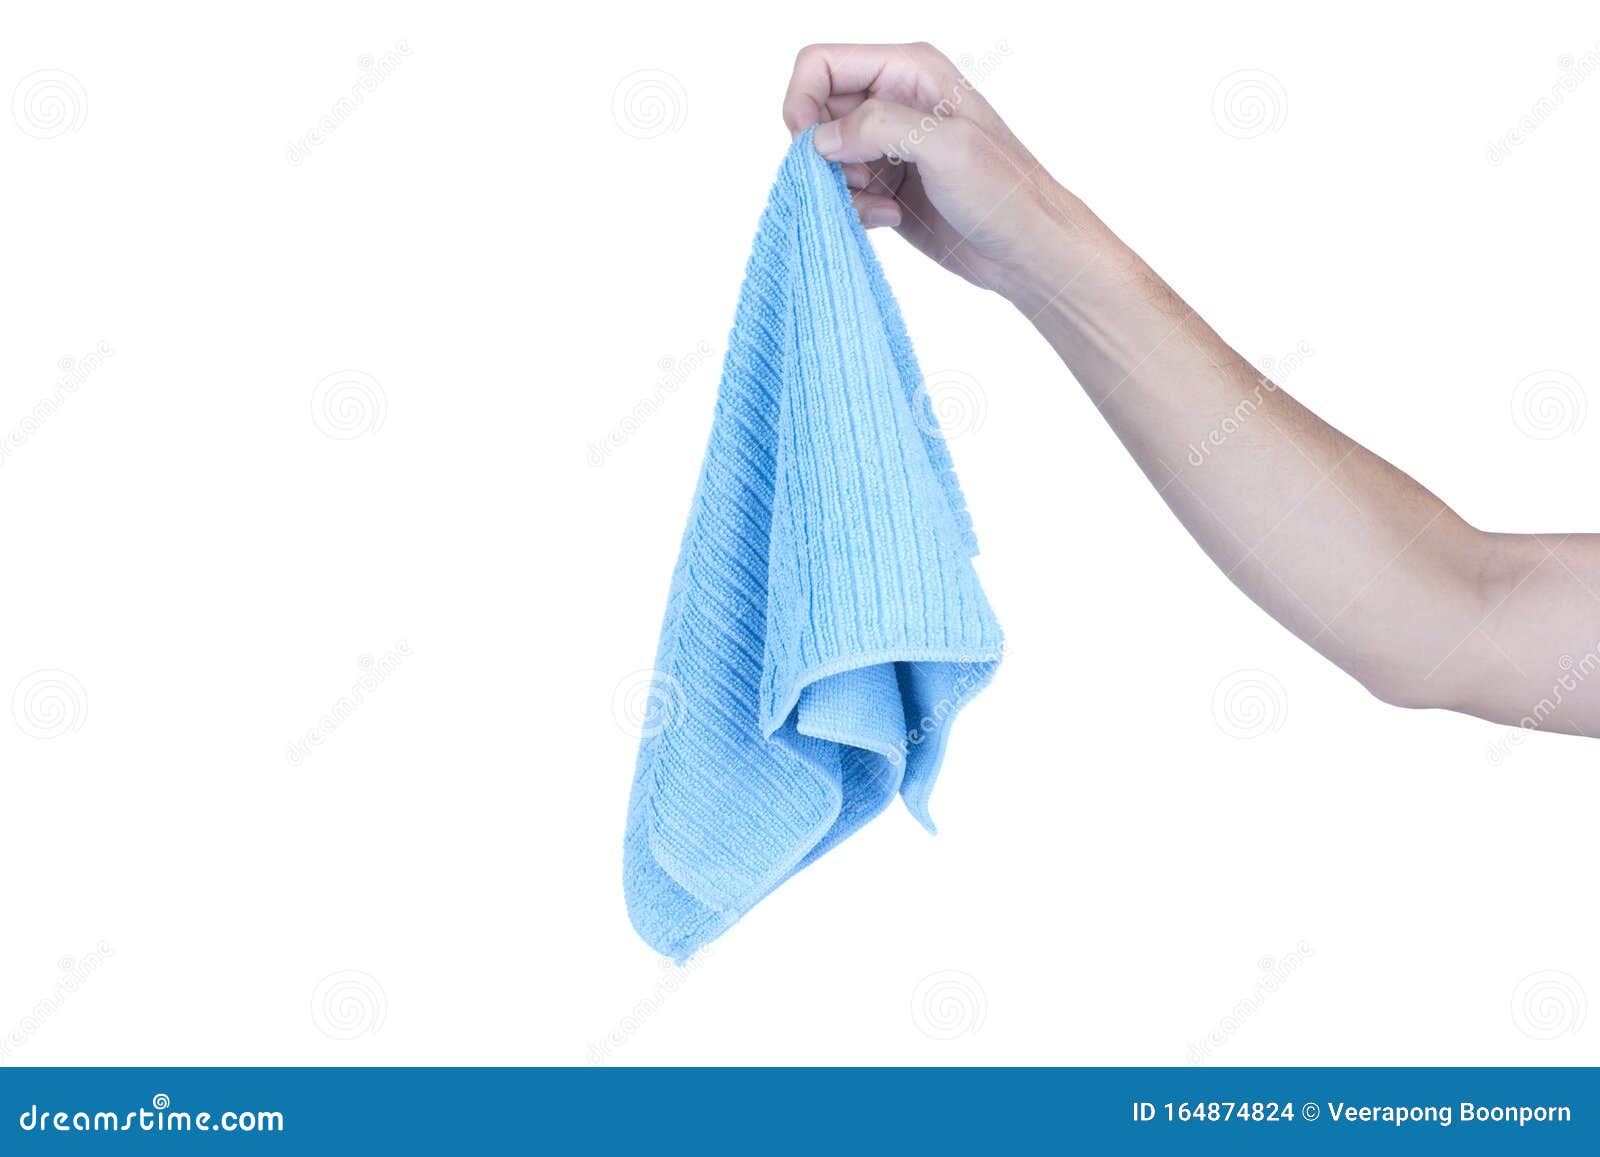 https://thumbs.dreamstime.com/z/hands-holding-cleaning-rag-microfiber-cloth-isolated-white-background-164874824.jpg